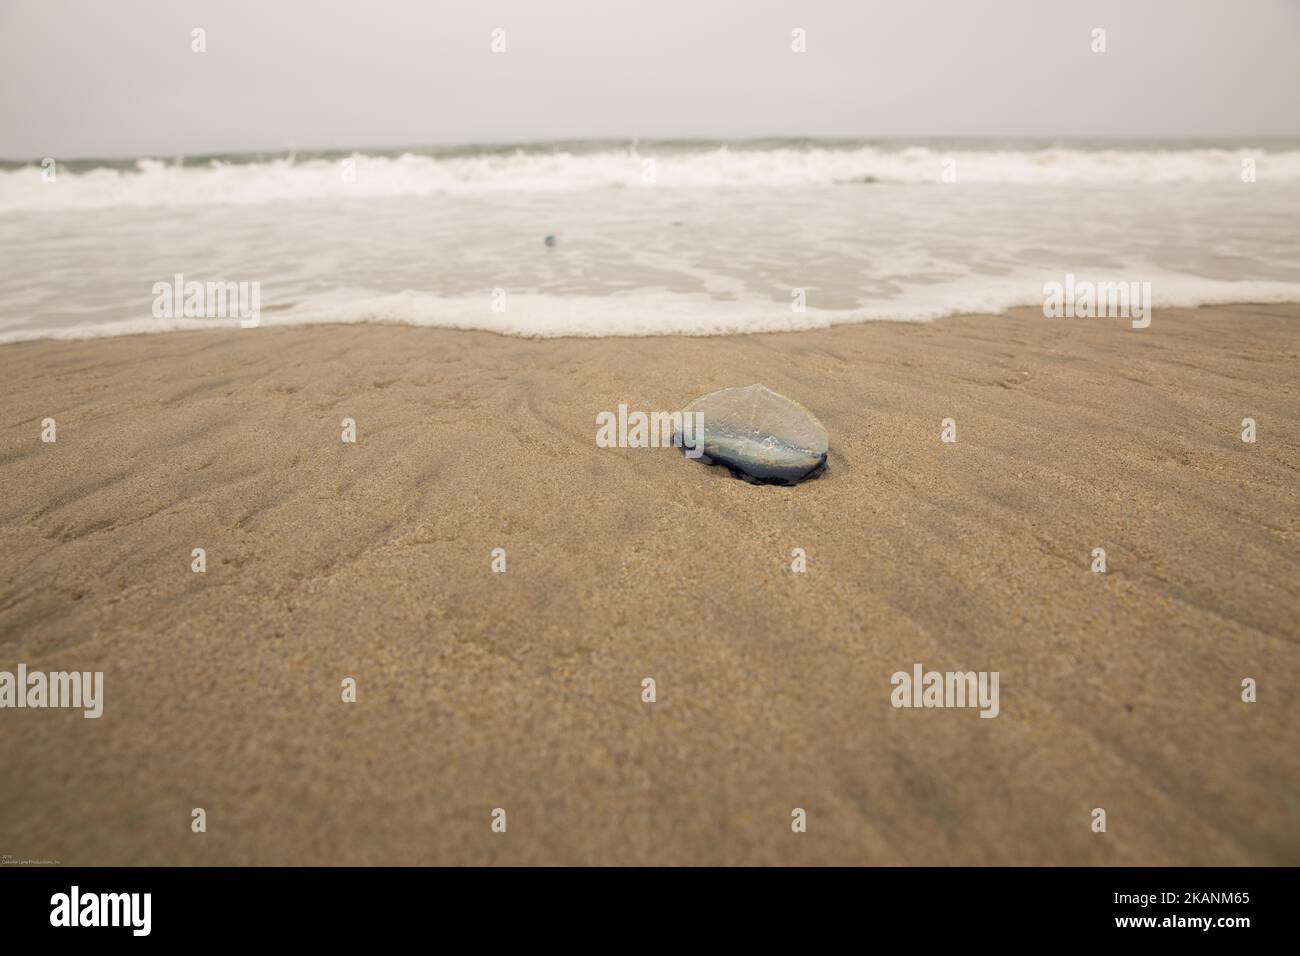 A closeup of a nomad jellyfish (Rhopilema nomadica) washed ashore by the sea waves. Jellyfish season concept Stock Photo